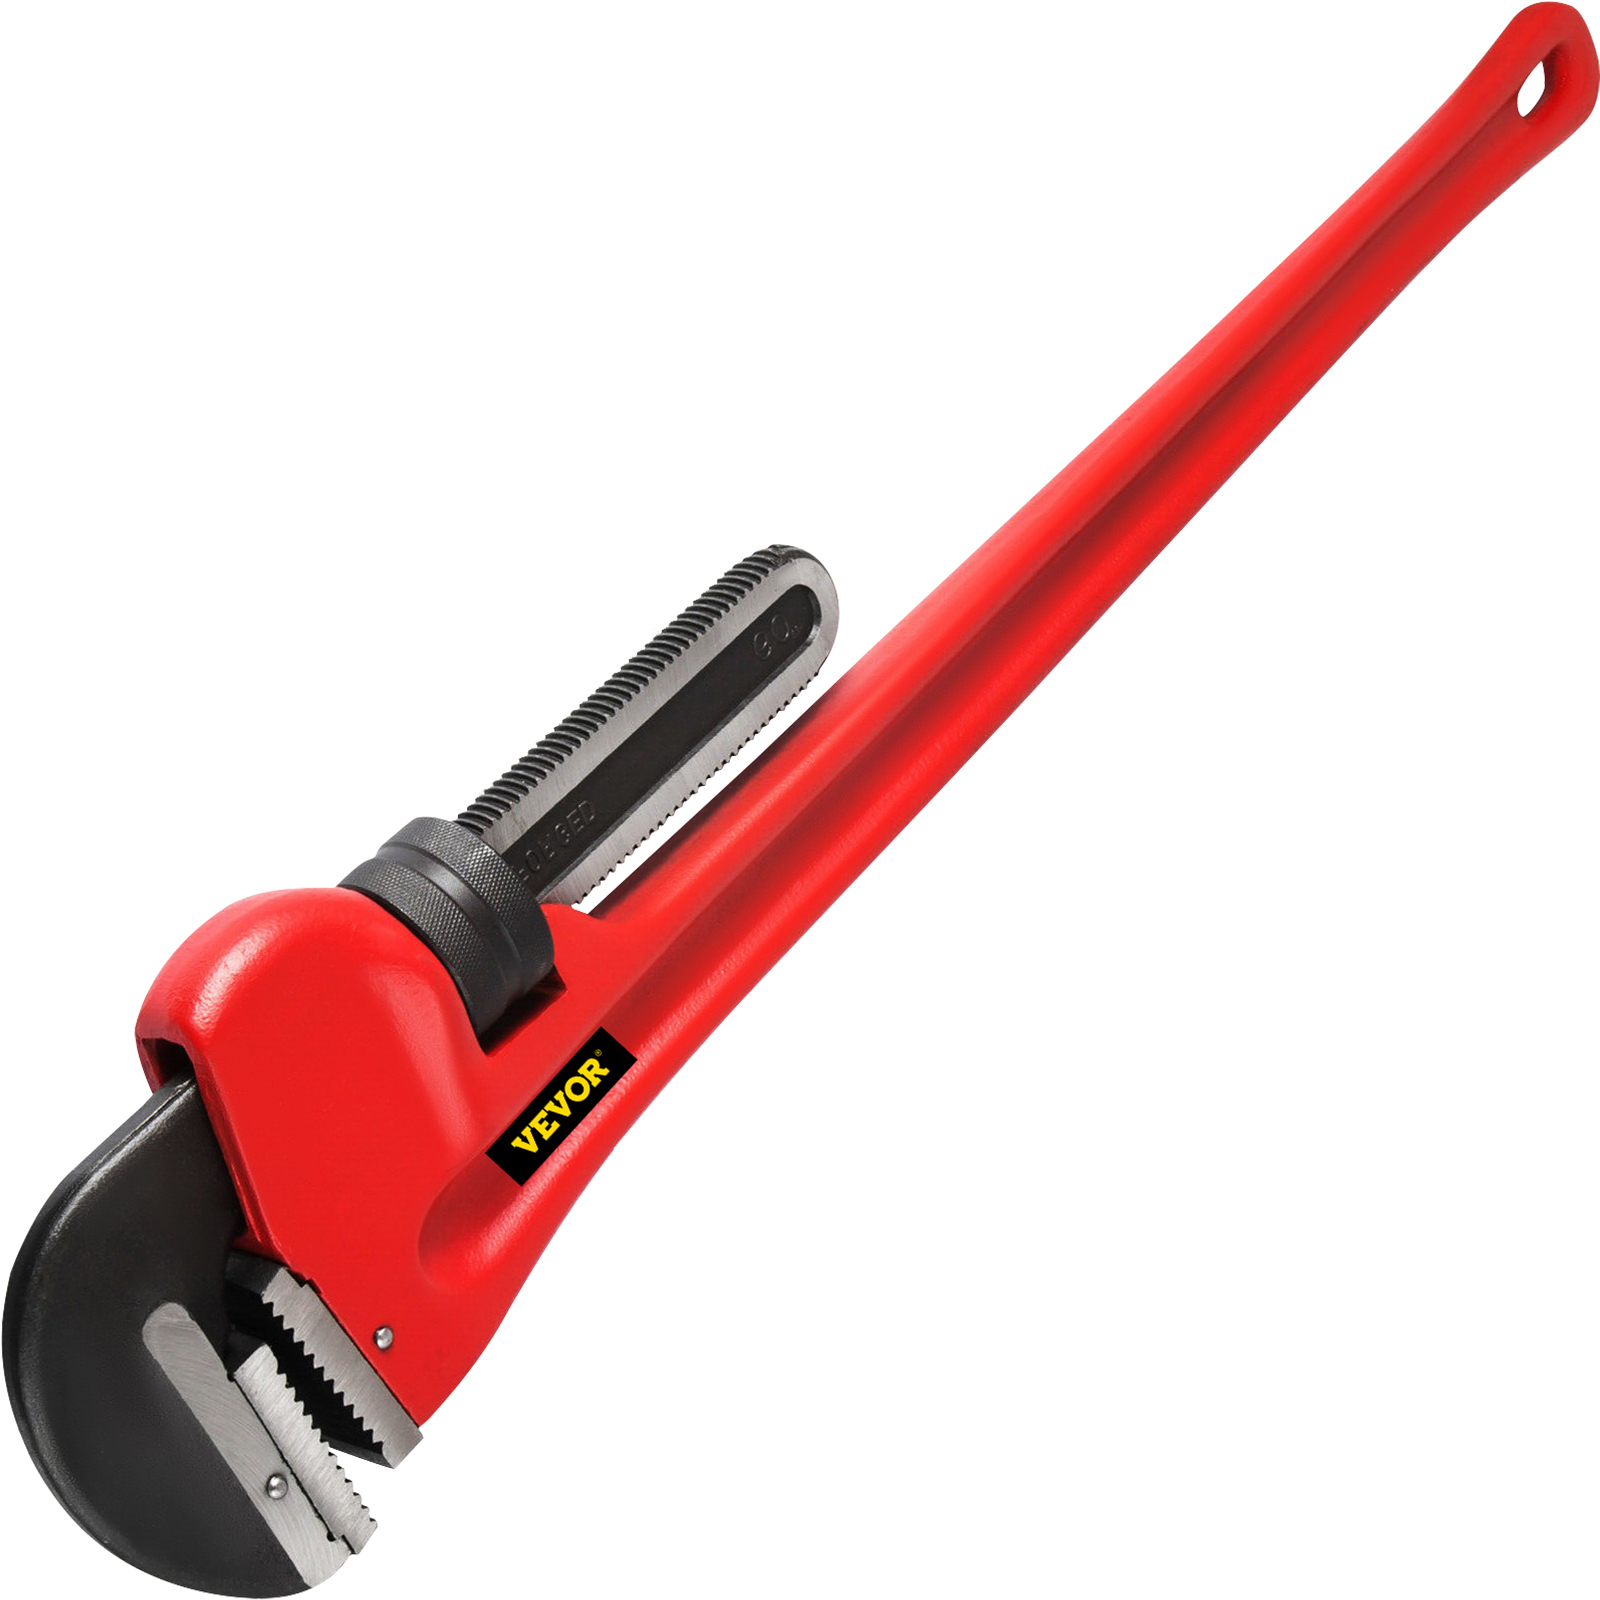 KARRYTON 60 Inch Pipe Wrench, Cr-Mo Jaw Opening 9/228mm Adjustable Heavy  Duty Cast Iron Straight Handle Plumbing Wrench, Perfect Plumbers Tool for